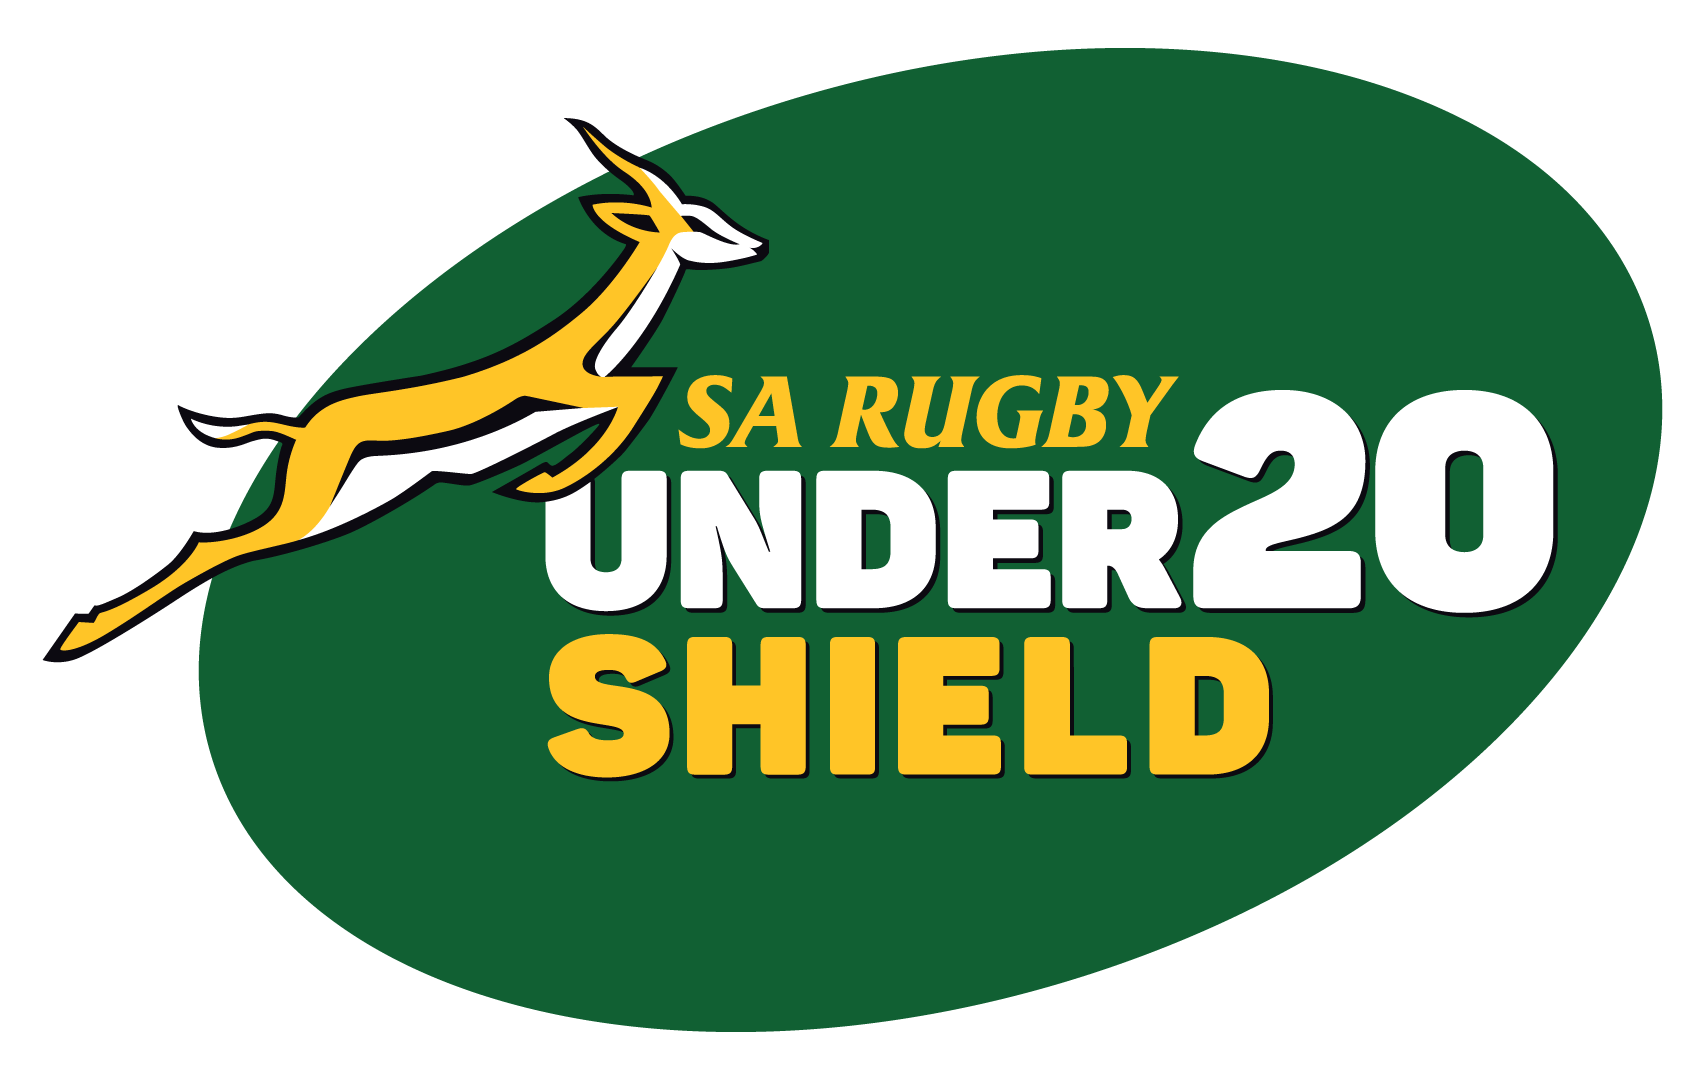 SA RUGBY UNDER-20 SHIELD